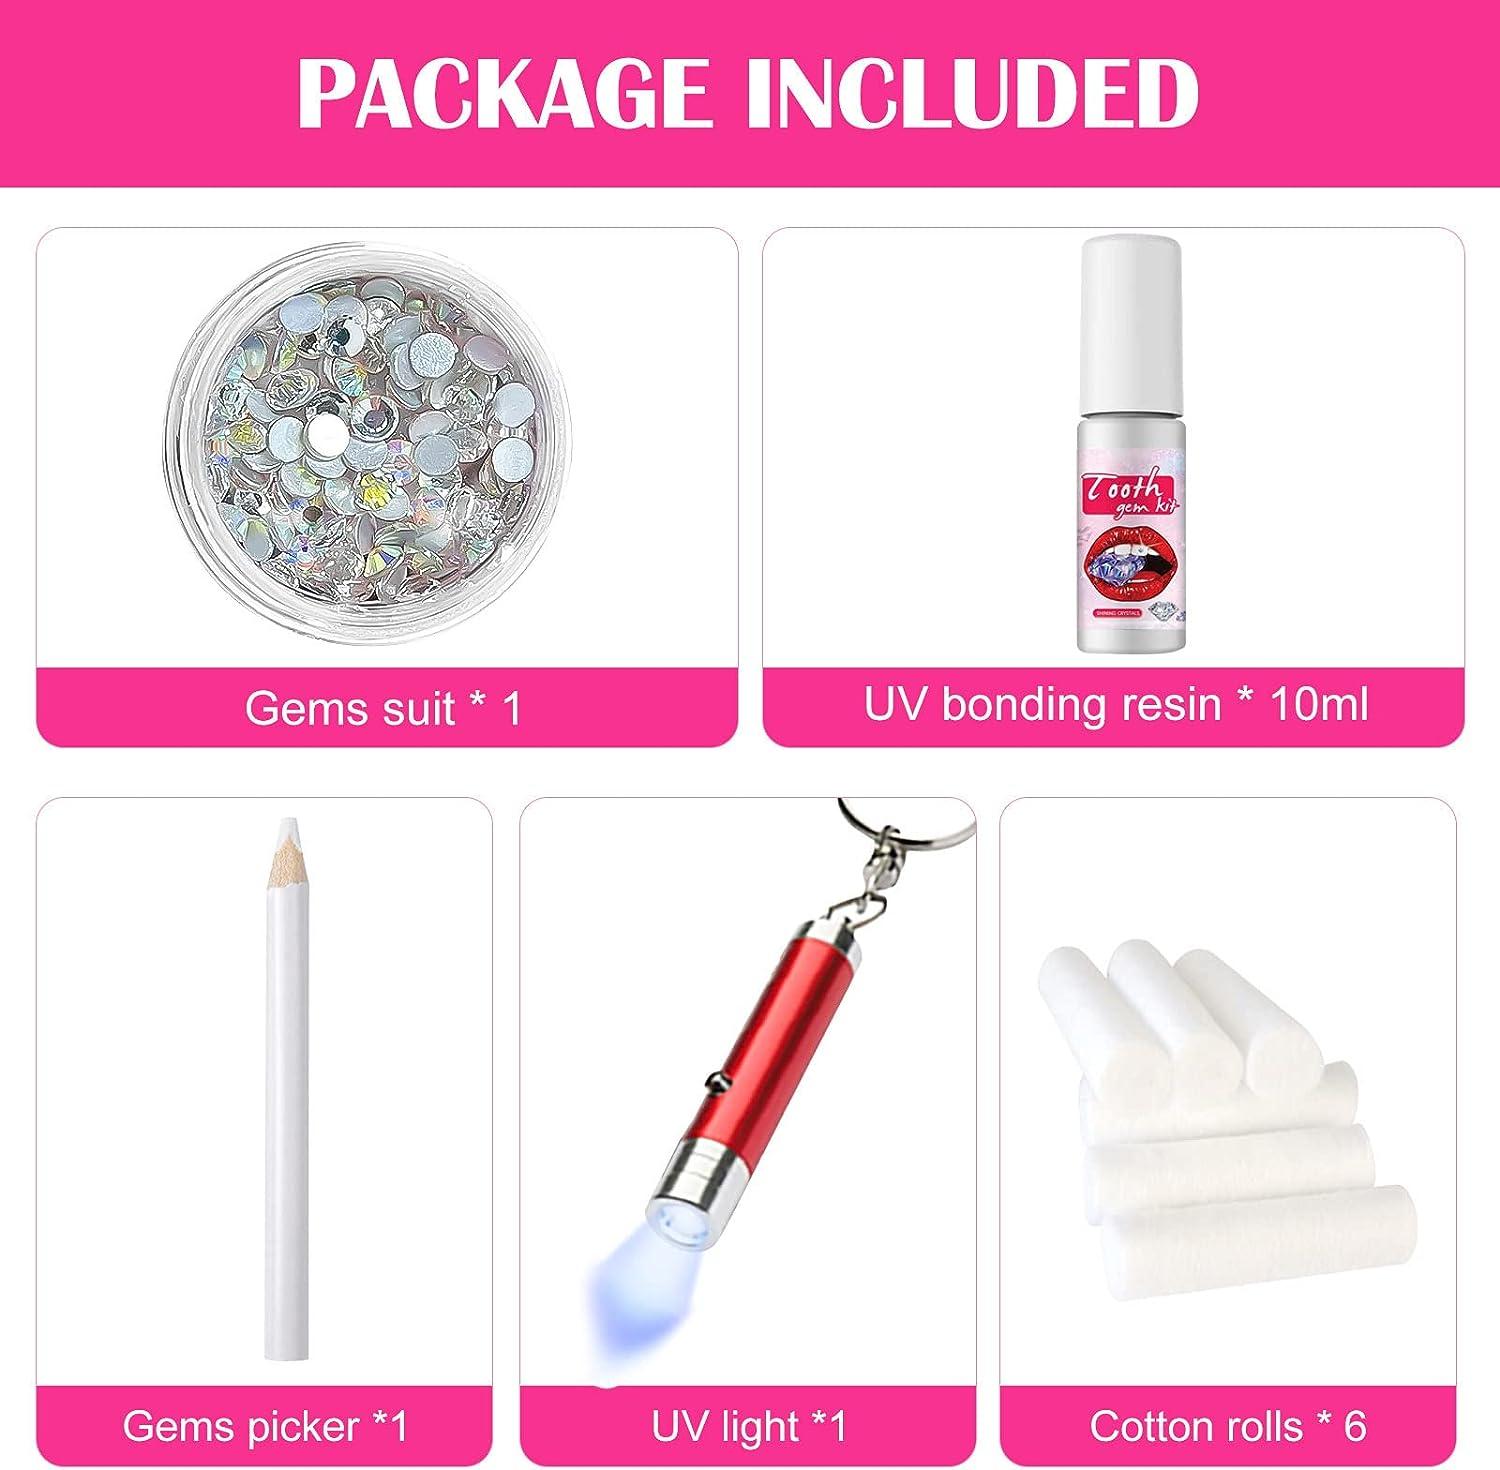 Tooth Gem Kit, Tooth Crystal Set with Light & Glue, DIY Fashionable Tooth  Crystal Kit for Starter, 20 PCS